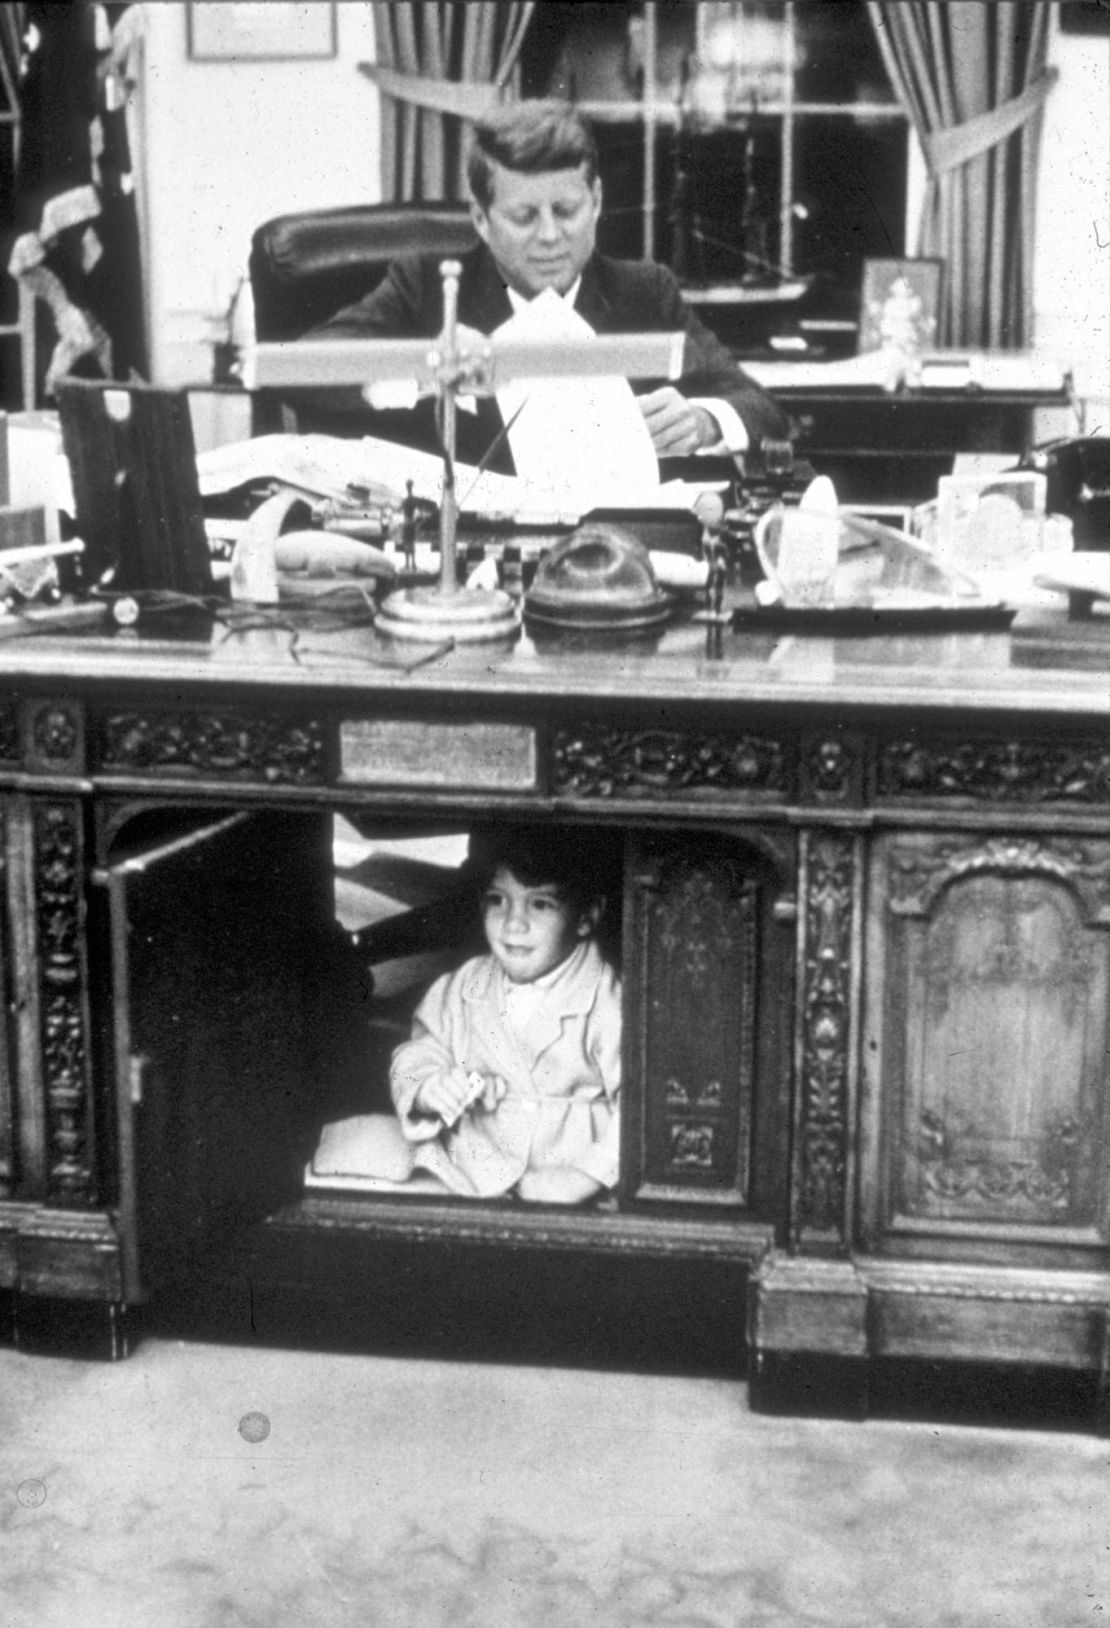 John F. Kennedy works at the Resolute Desk in the Oval Office while his son, John Jr., peeks out from the panel underneath the desk.